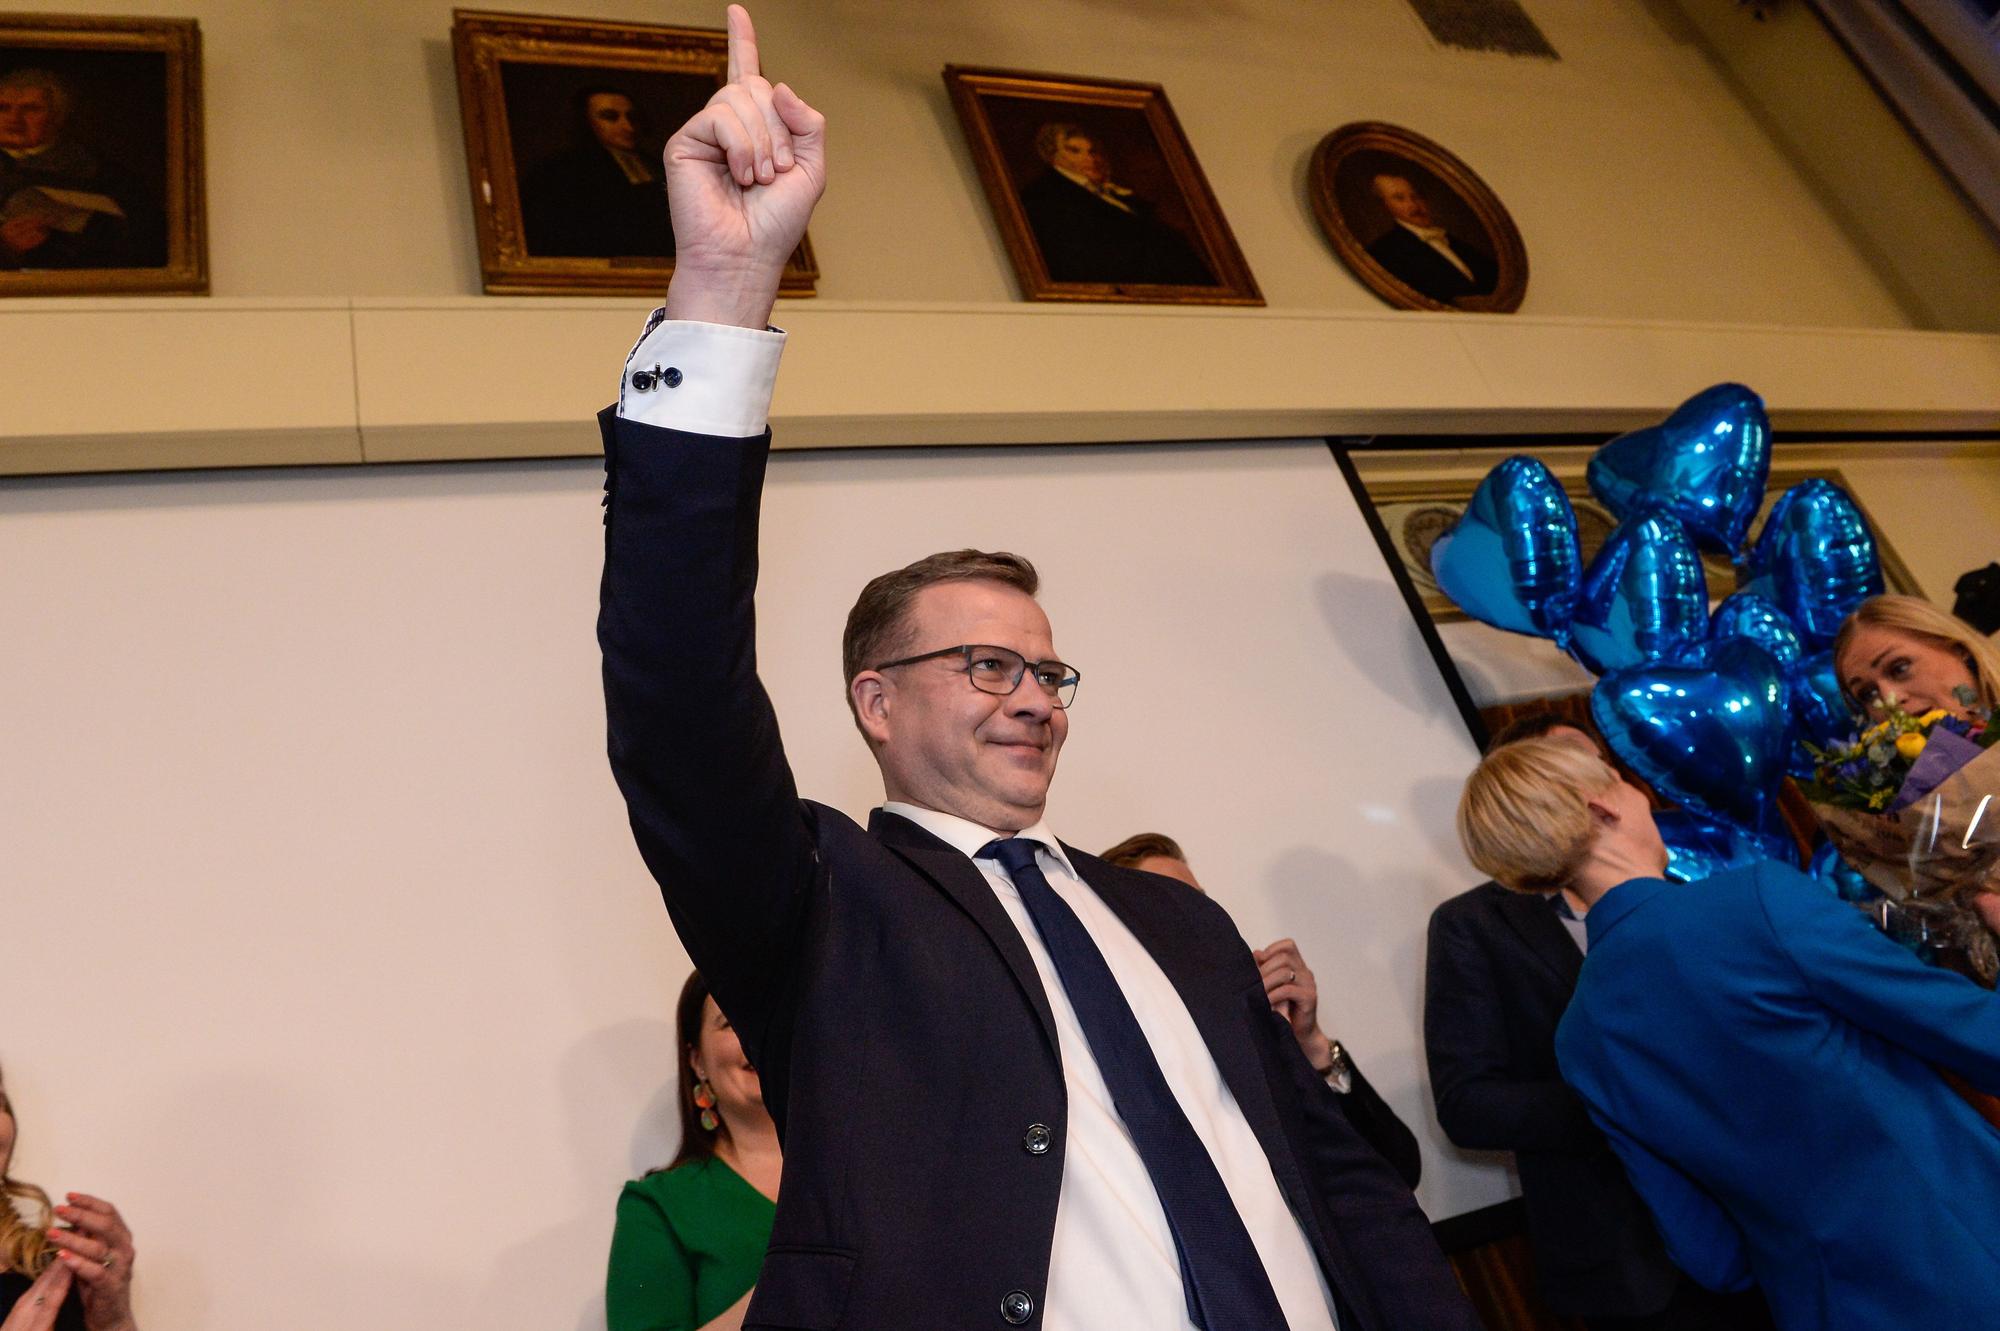 Parliamentary election in Finland